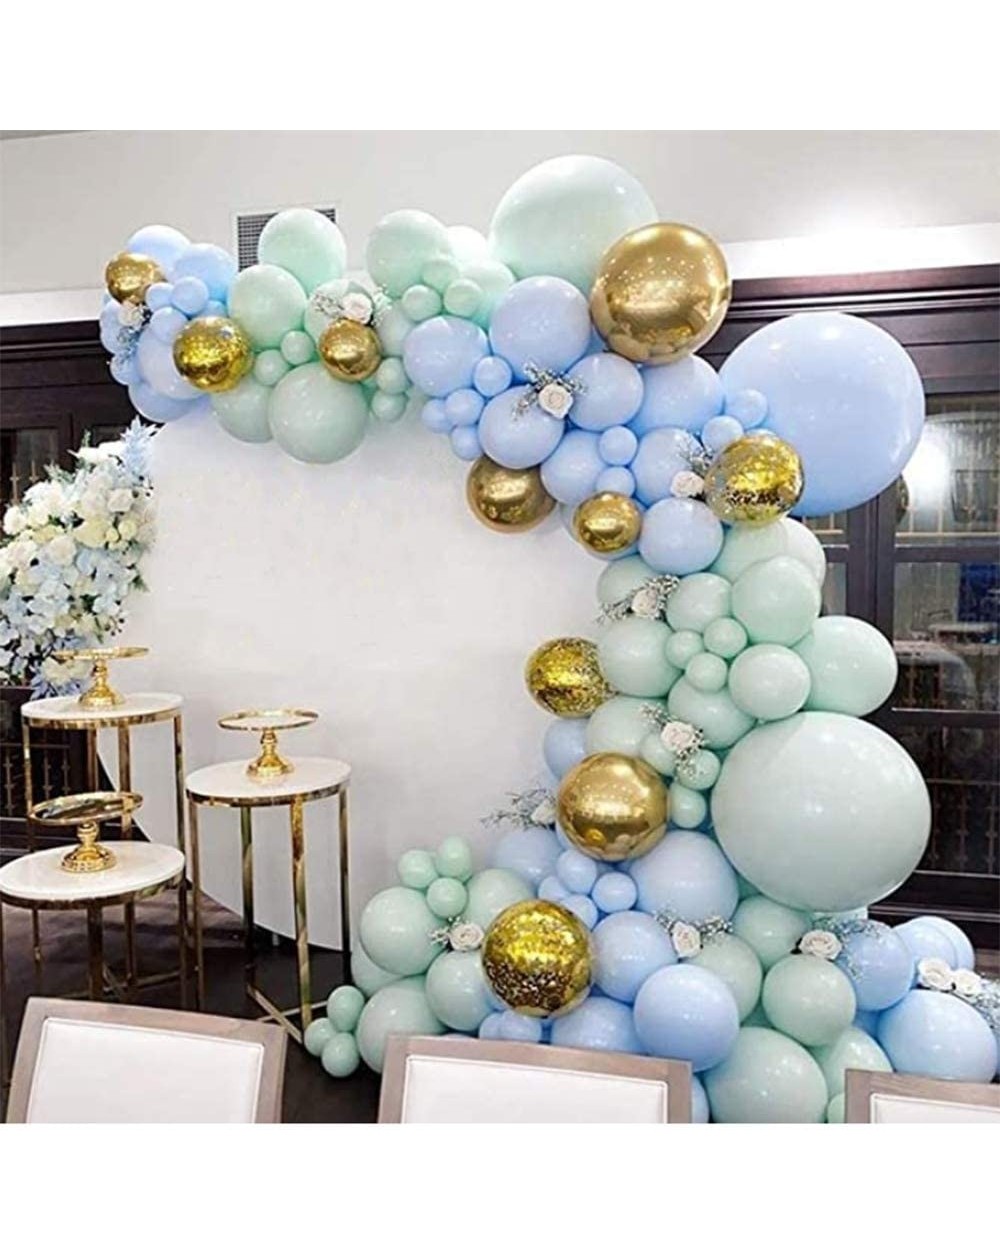 Balloons Balloon Garland Arch Kit Comes With A Balloon Pump 36 To 5 Inches Macaron Colorful Thicken Balloons Used for Wedding...